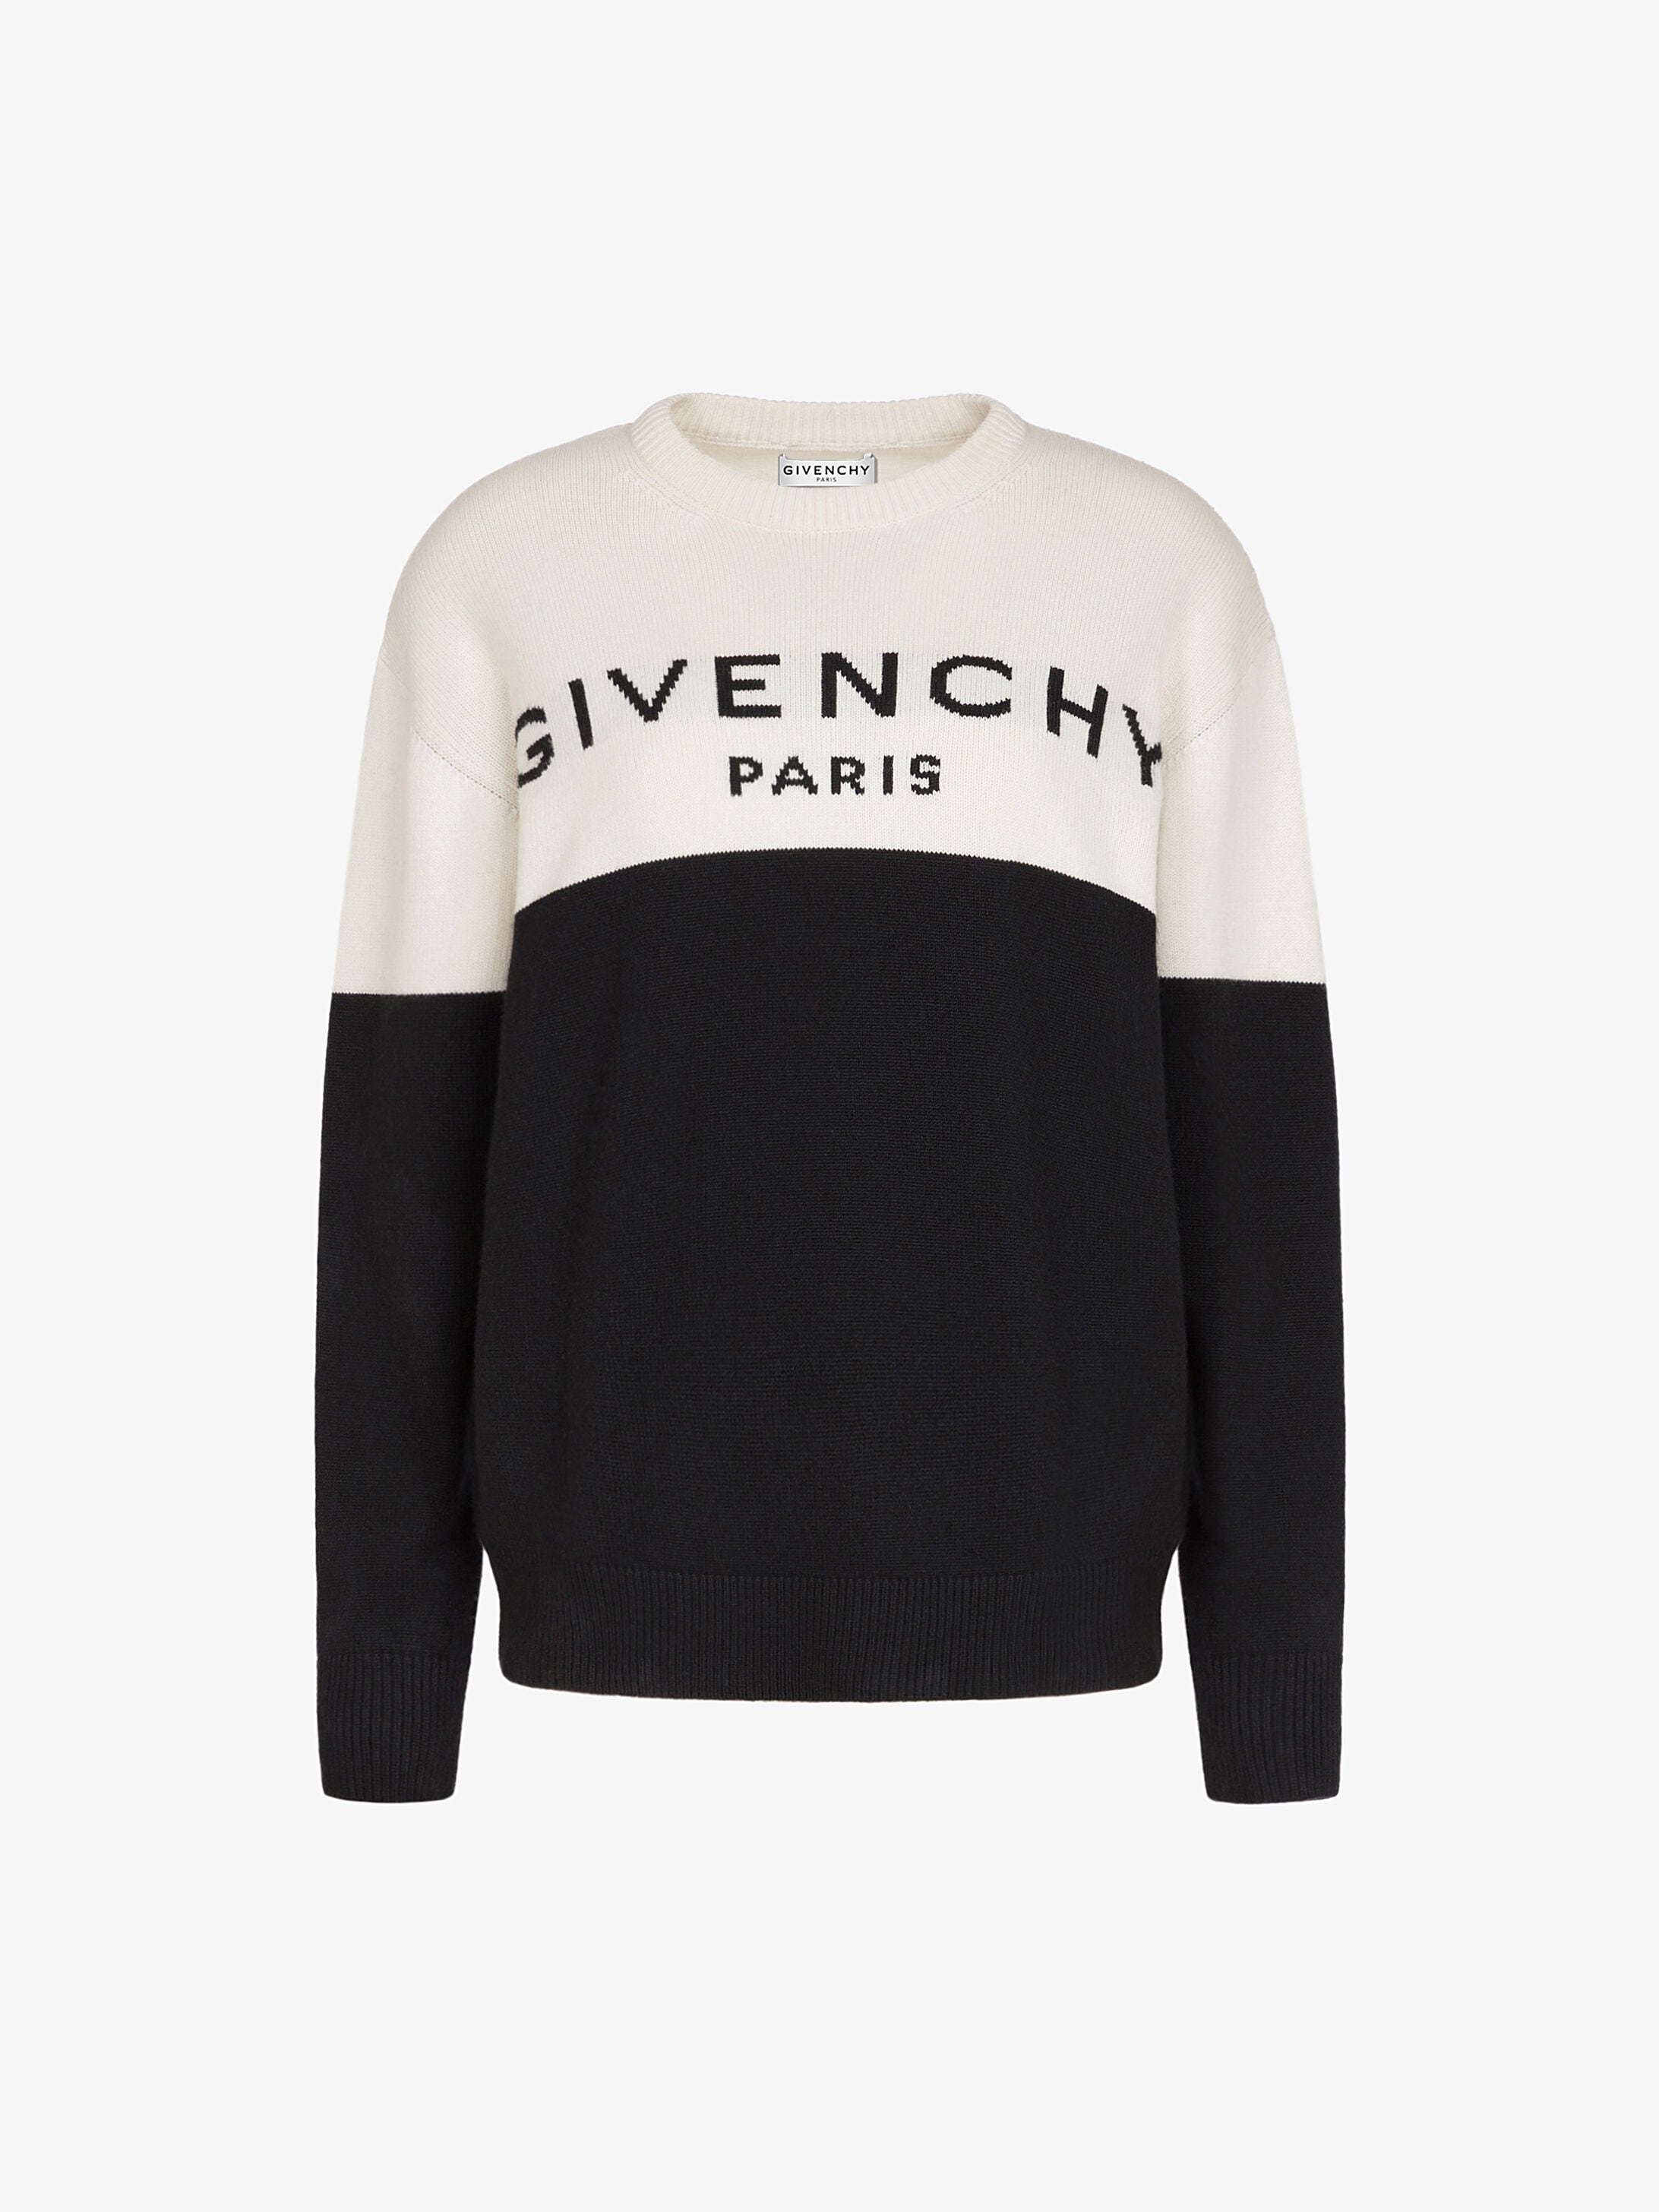 Givenchy Sweater Britain, SAVE 39% 